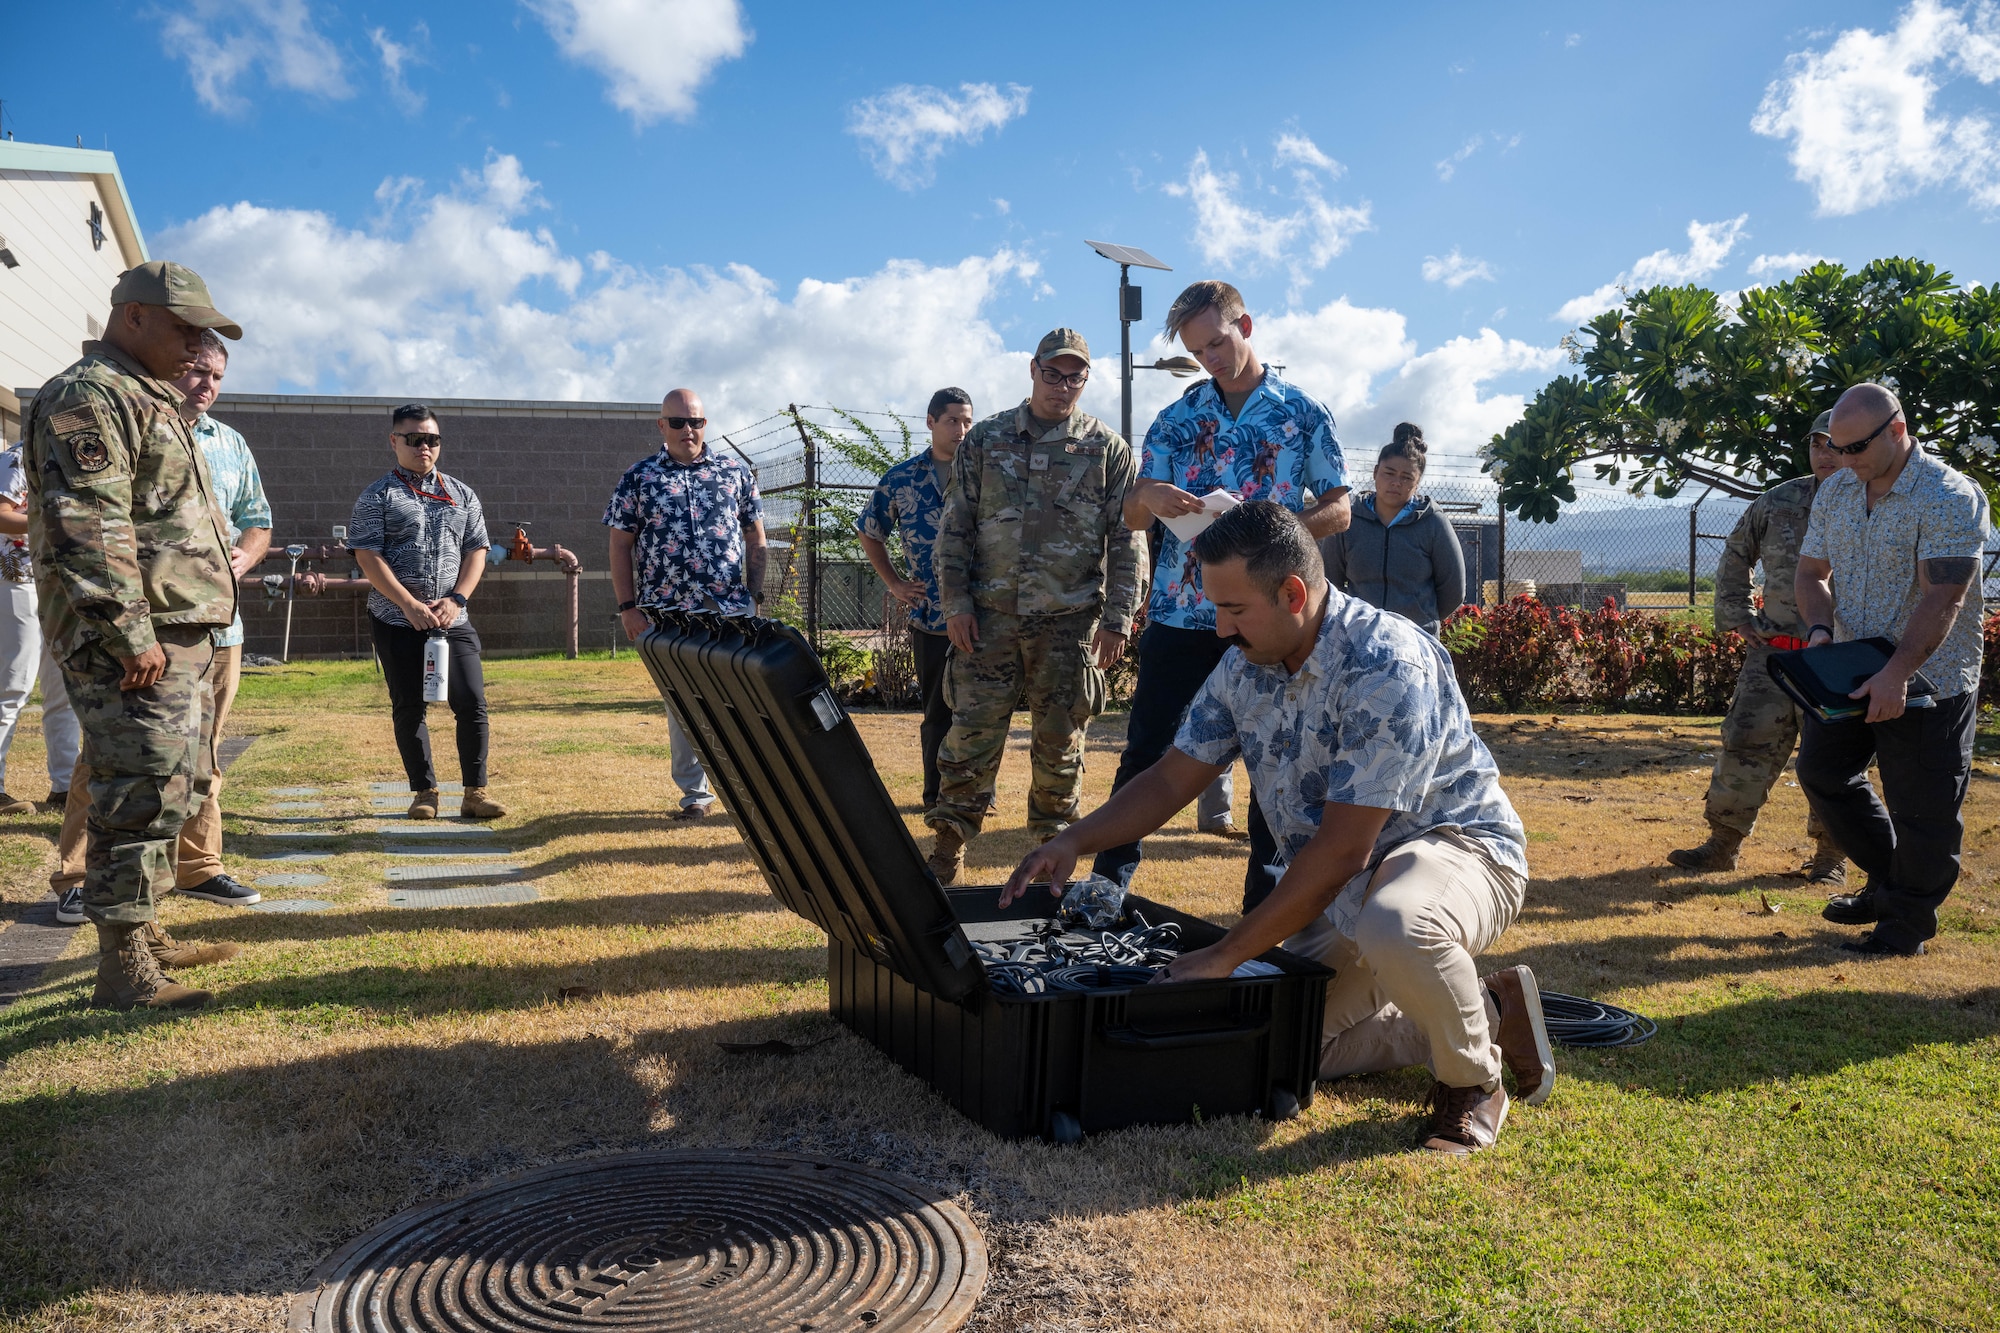 Master Sgt. Robert Phillips, 15th Maintenance Squadron production superintendent, demonstrates how to set up the commercial satellite kit at Joint Base Pearl Harbor-Hickam, Hawaii, August 11, 2023. The 15th MXS trained in setting up and tearing down the kit, a tool that provides high-speed internet and connectivity improving communications and allows Airmen to communicate back to the 15th Maintenance Group from anywhere around the globe. (U.S. Air Force photo by Senior Airman Makensie Cooper)